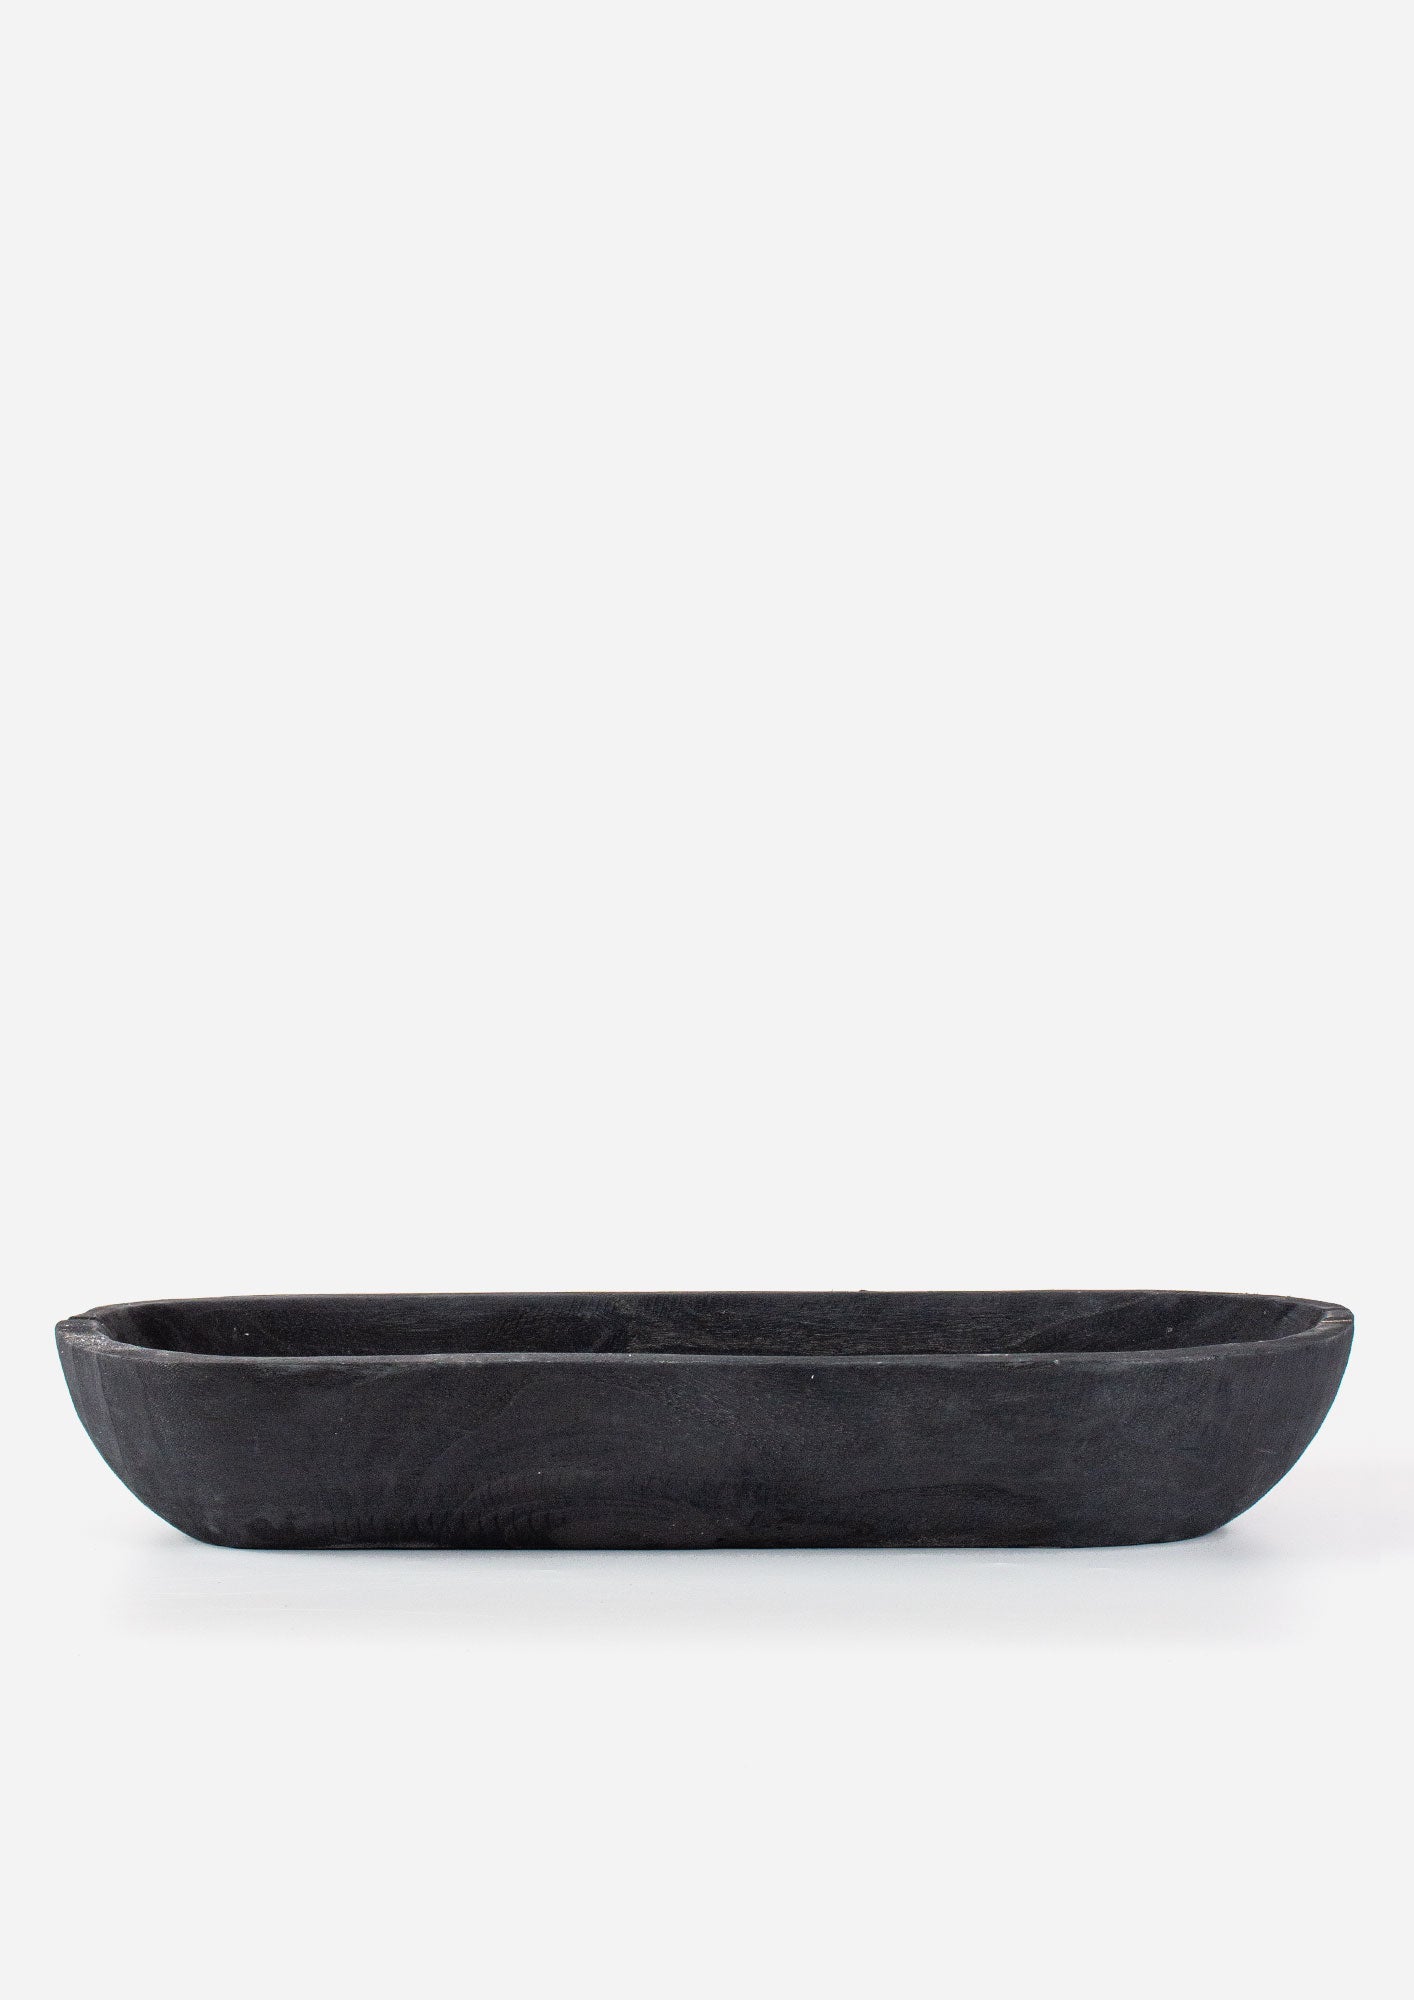 Caldwell Wooden Tray